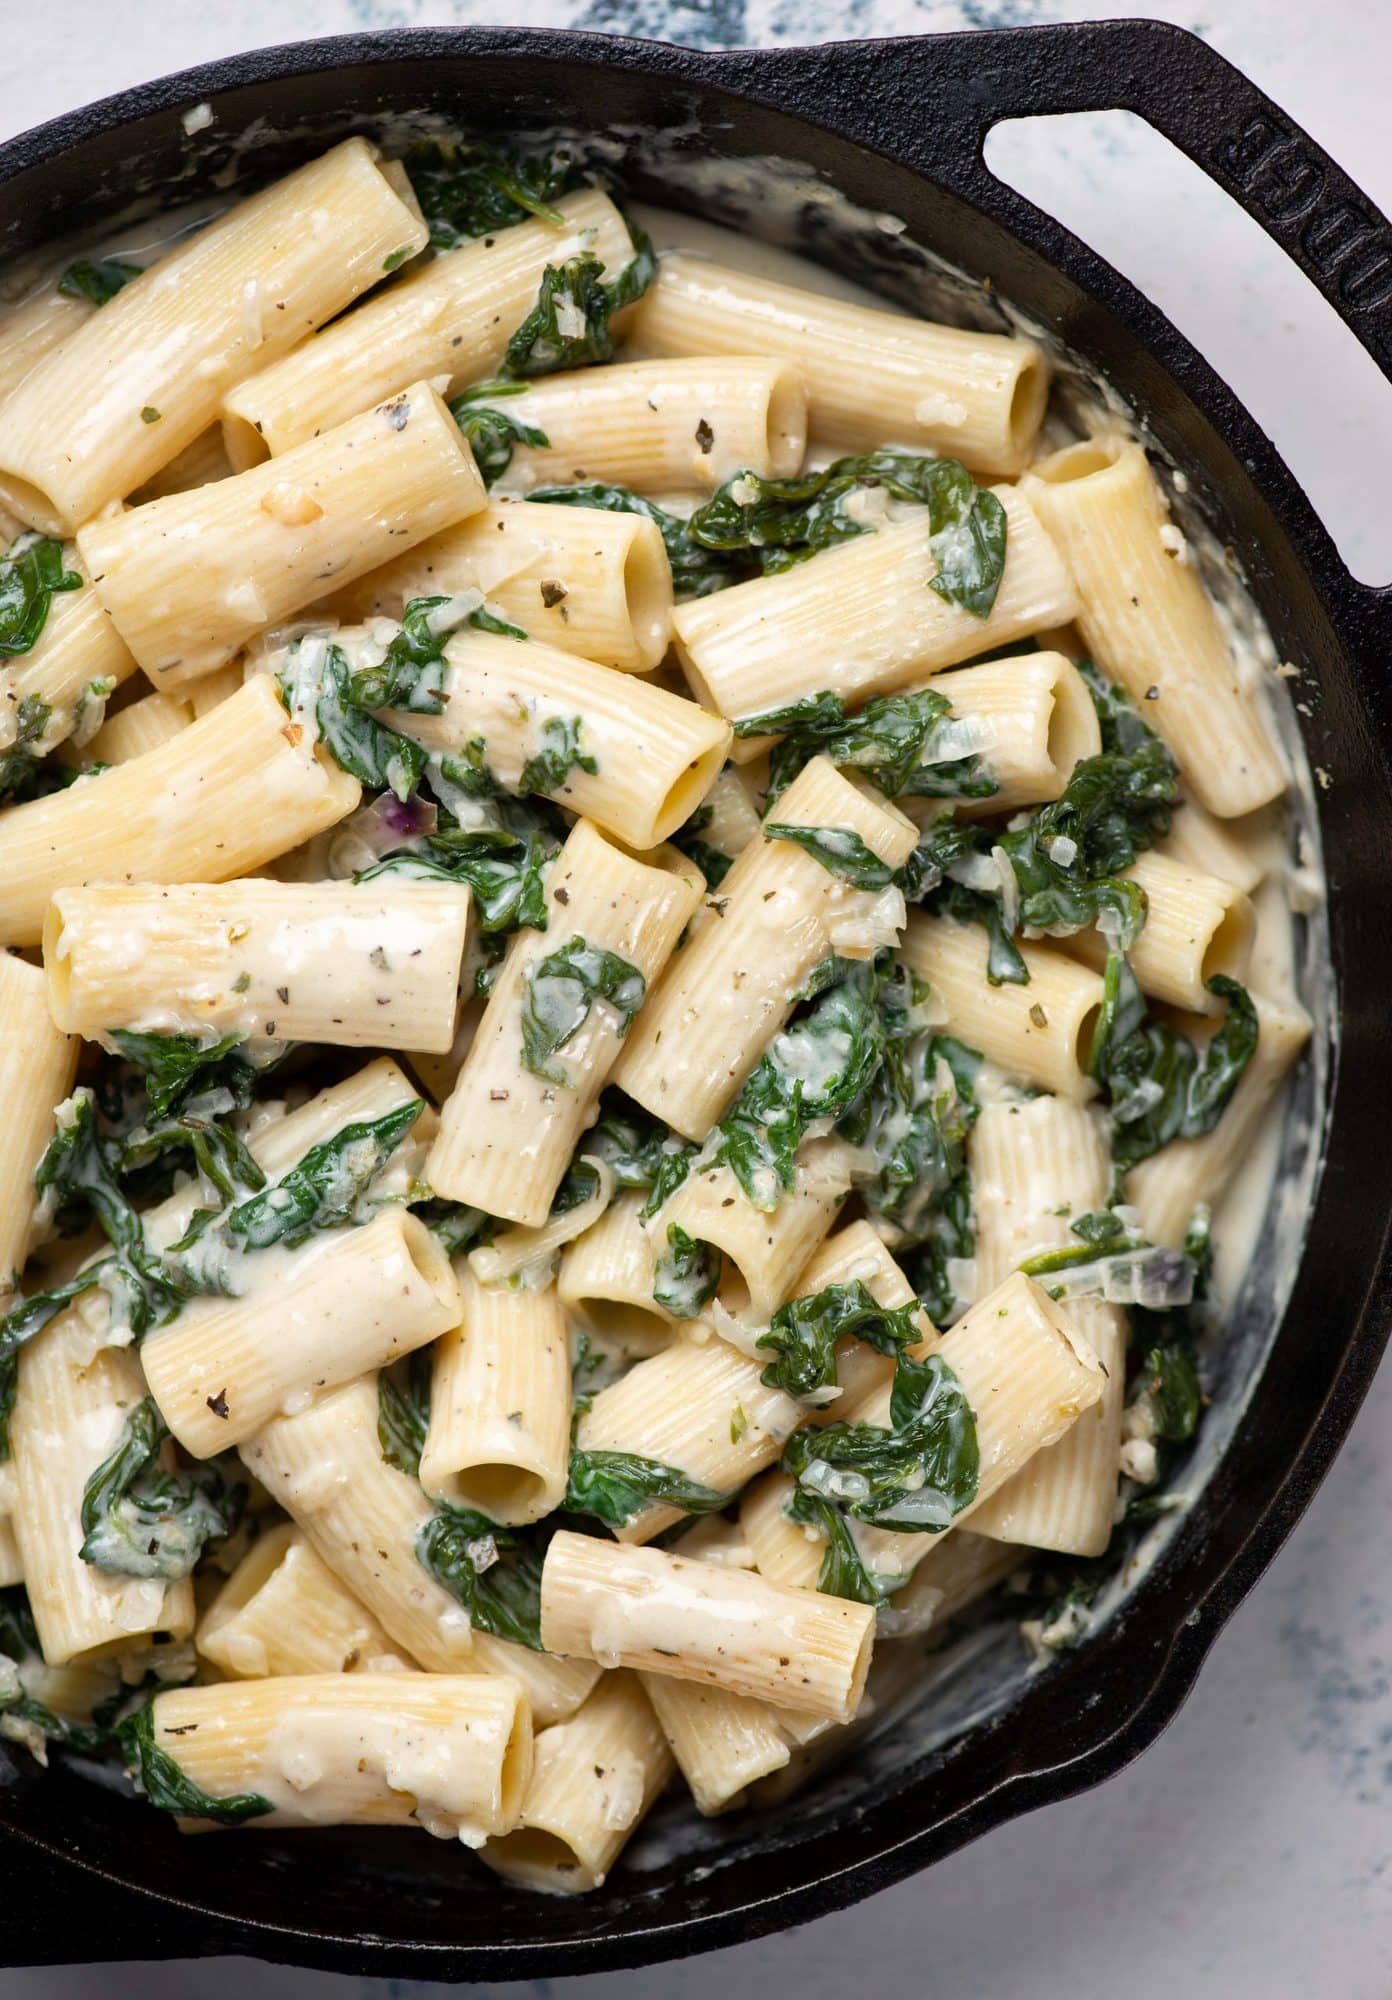 Creamy spinach pasta made in a skillet.